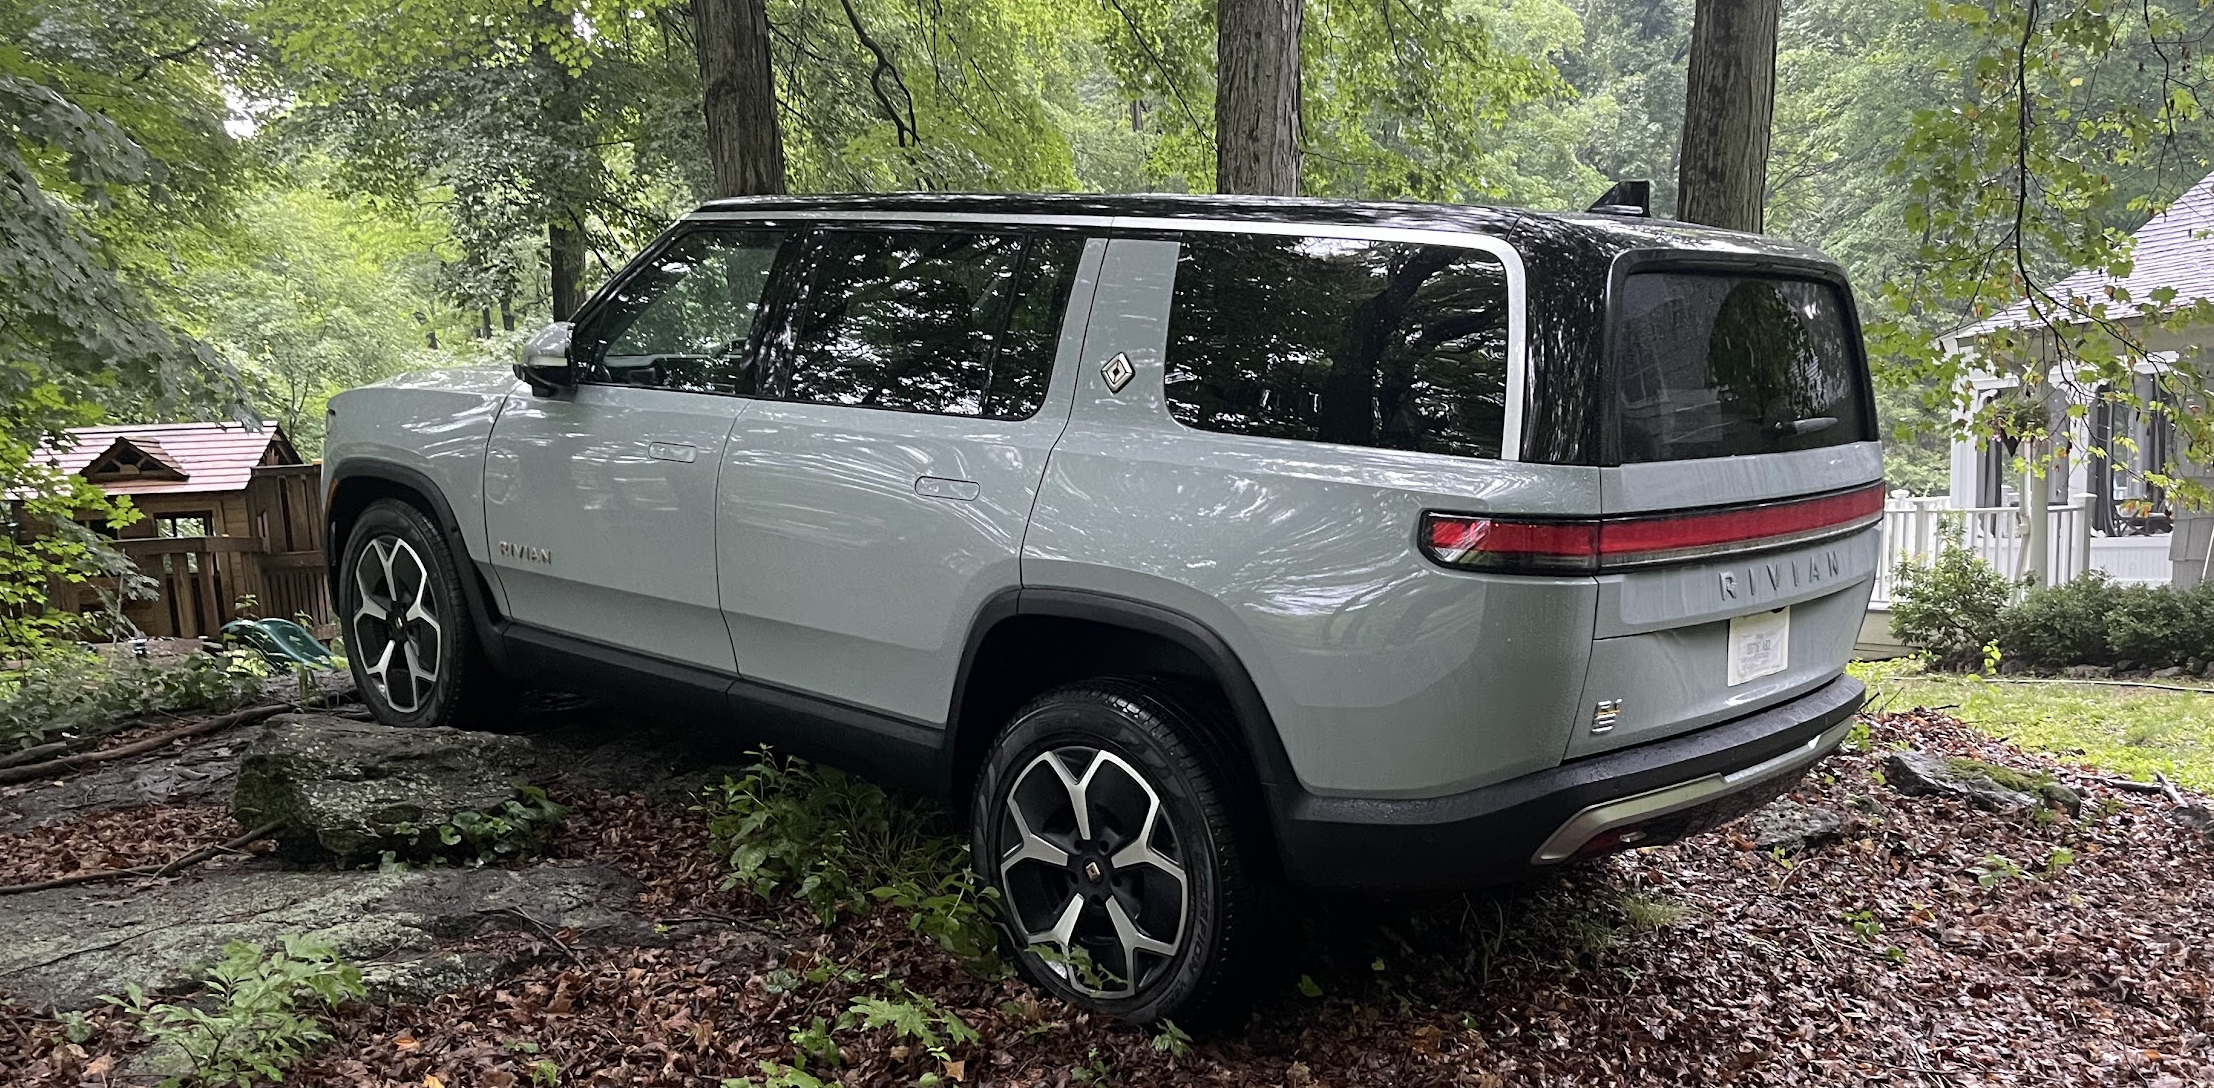 Rivian preempts NHTSA accelerator pedal recall with software solution